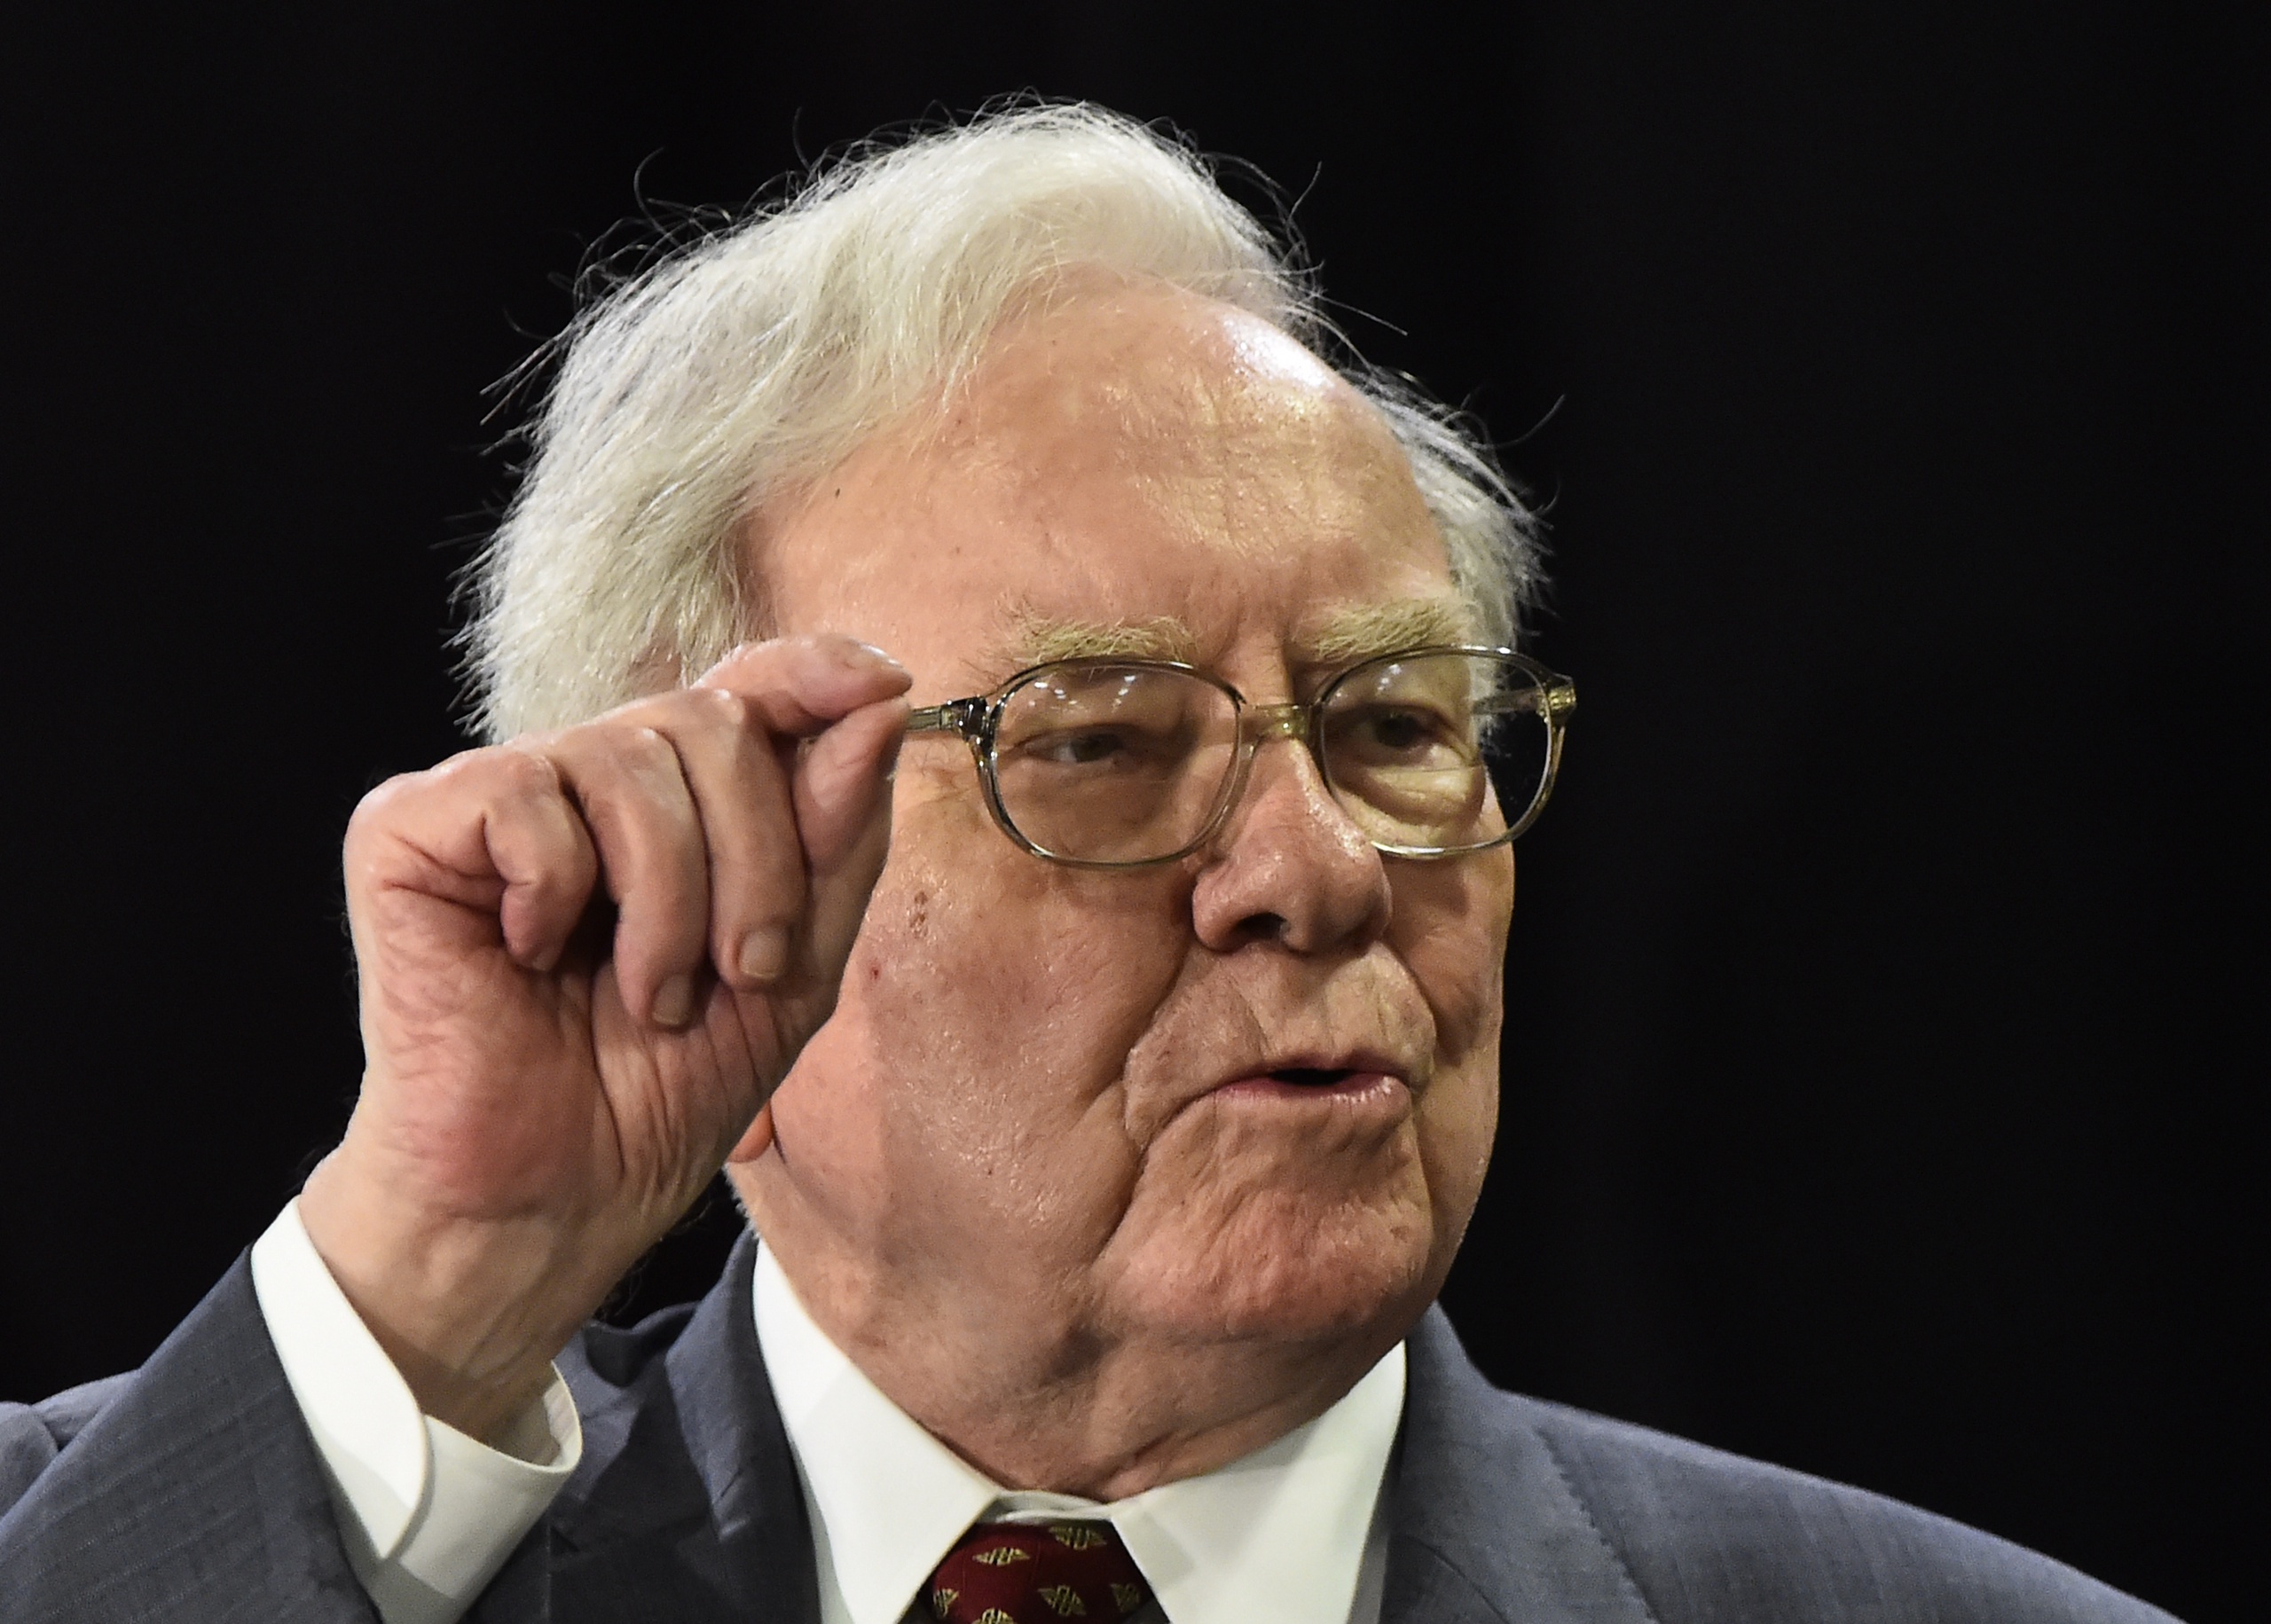 According to Warren Buffett, savers have been unnecessarily frightened by 'very bad' coverage from politicians, regulators and the press.